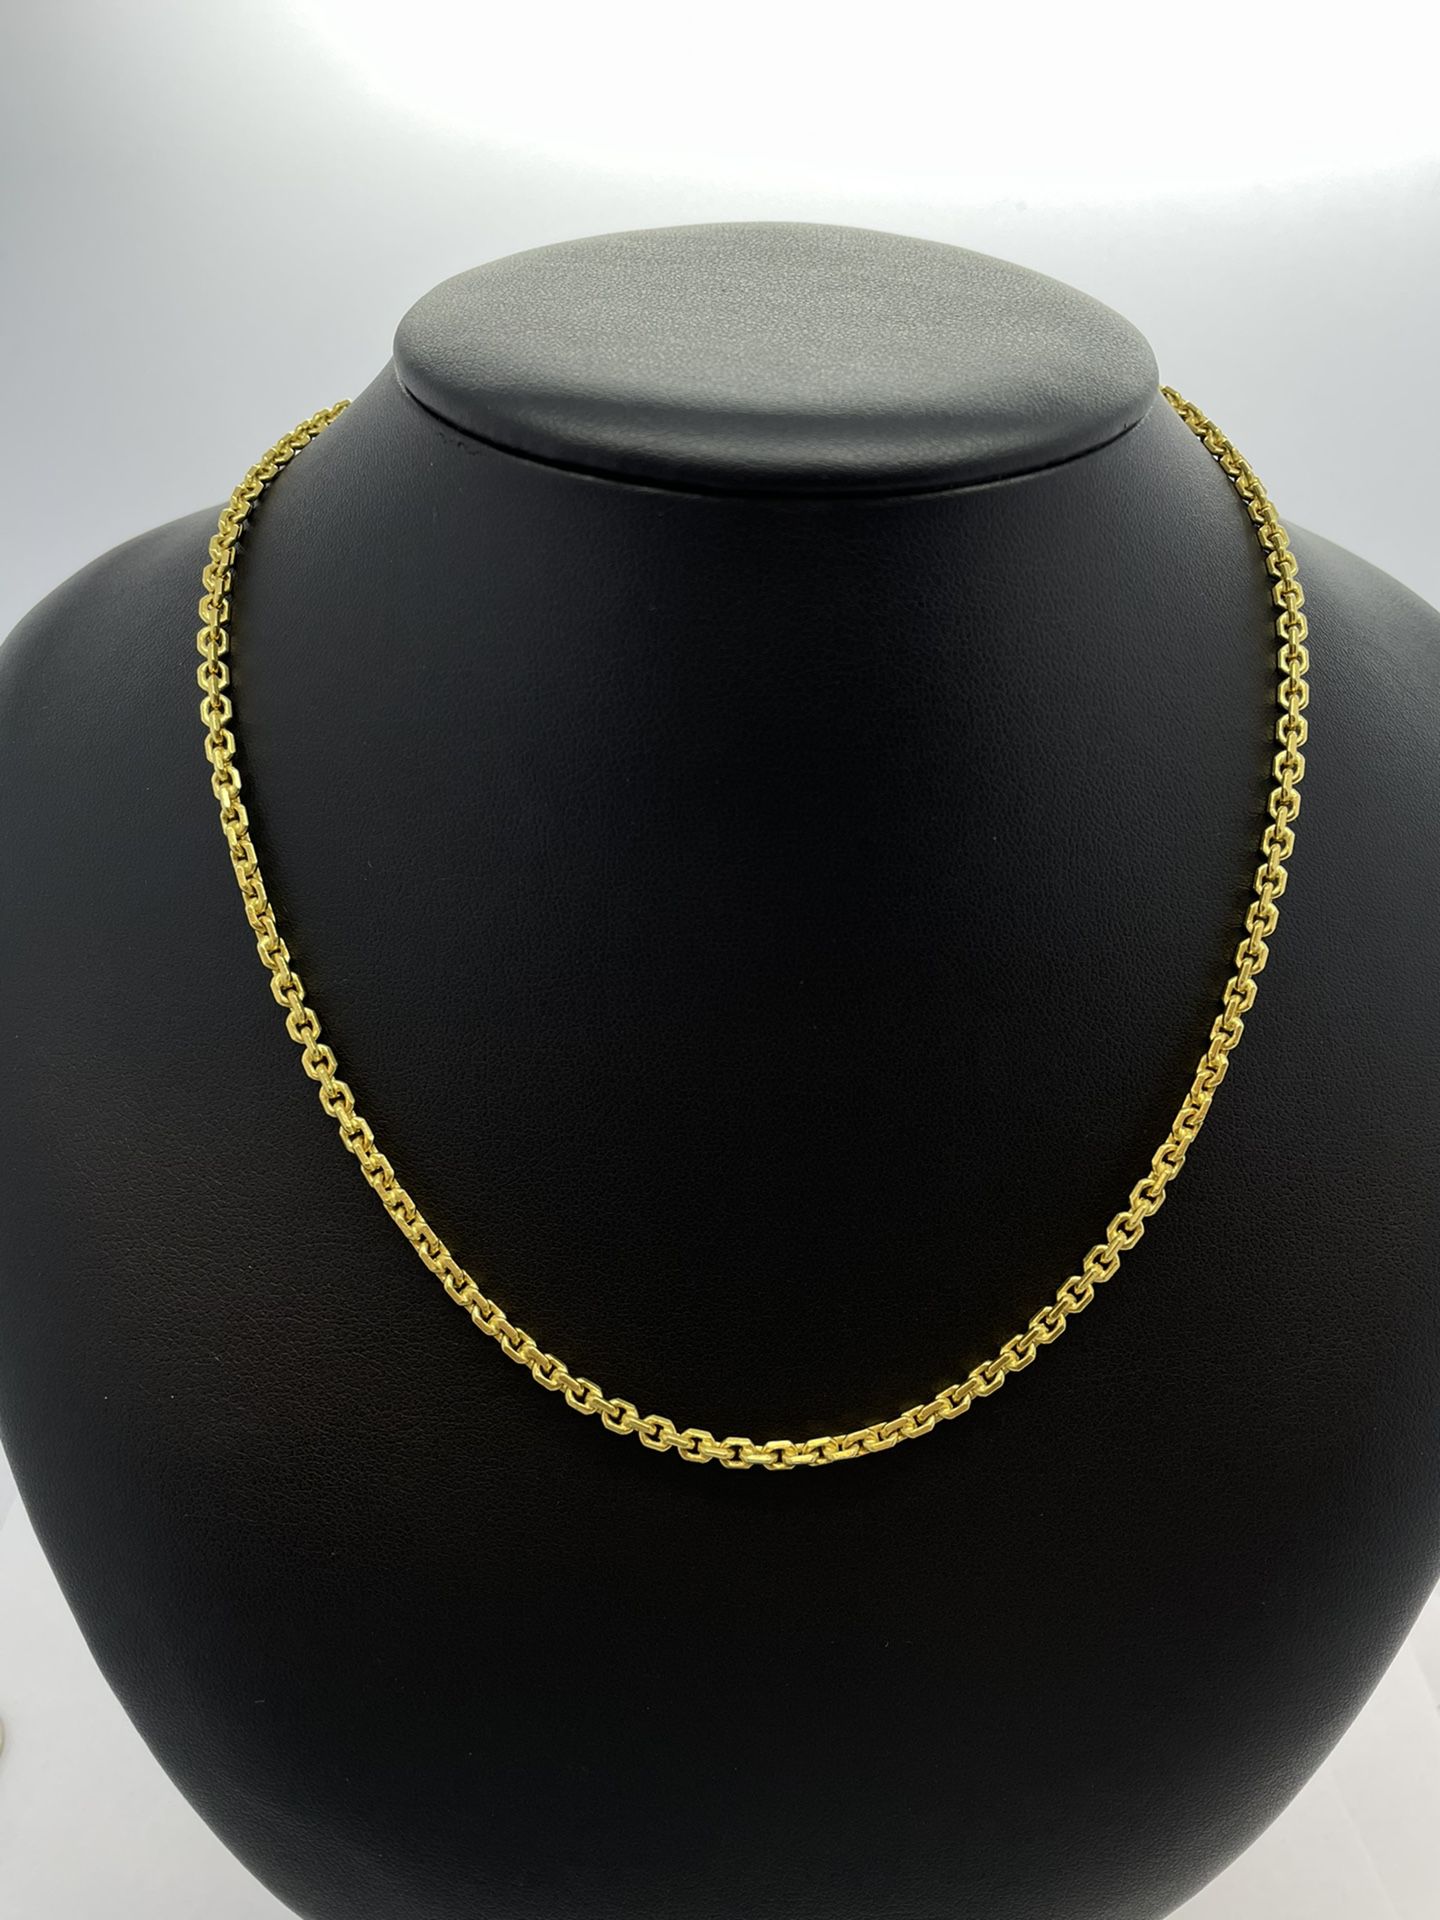 21K Solid Gold Link Chain 